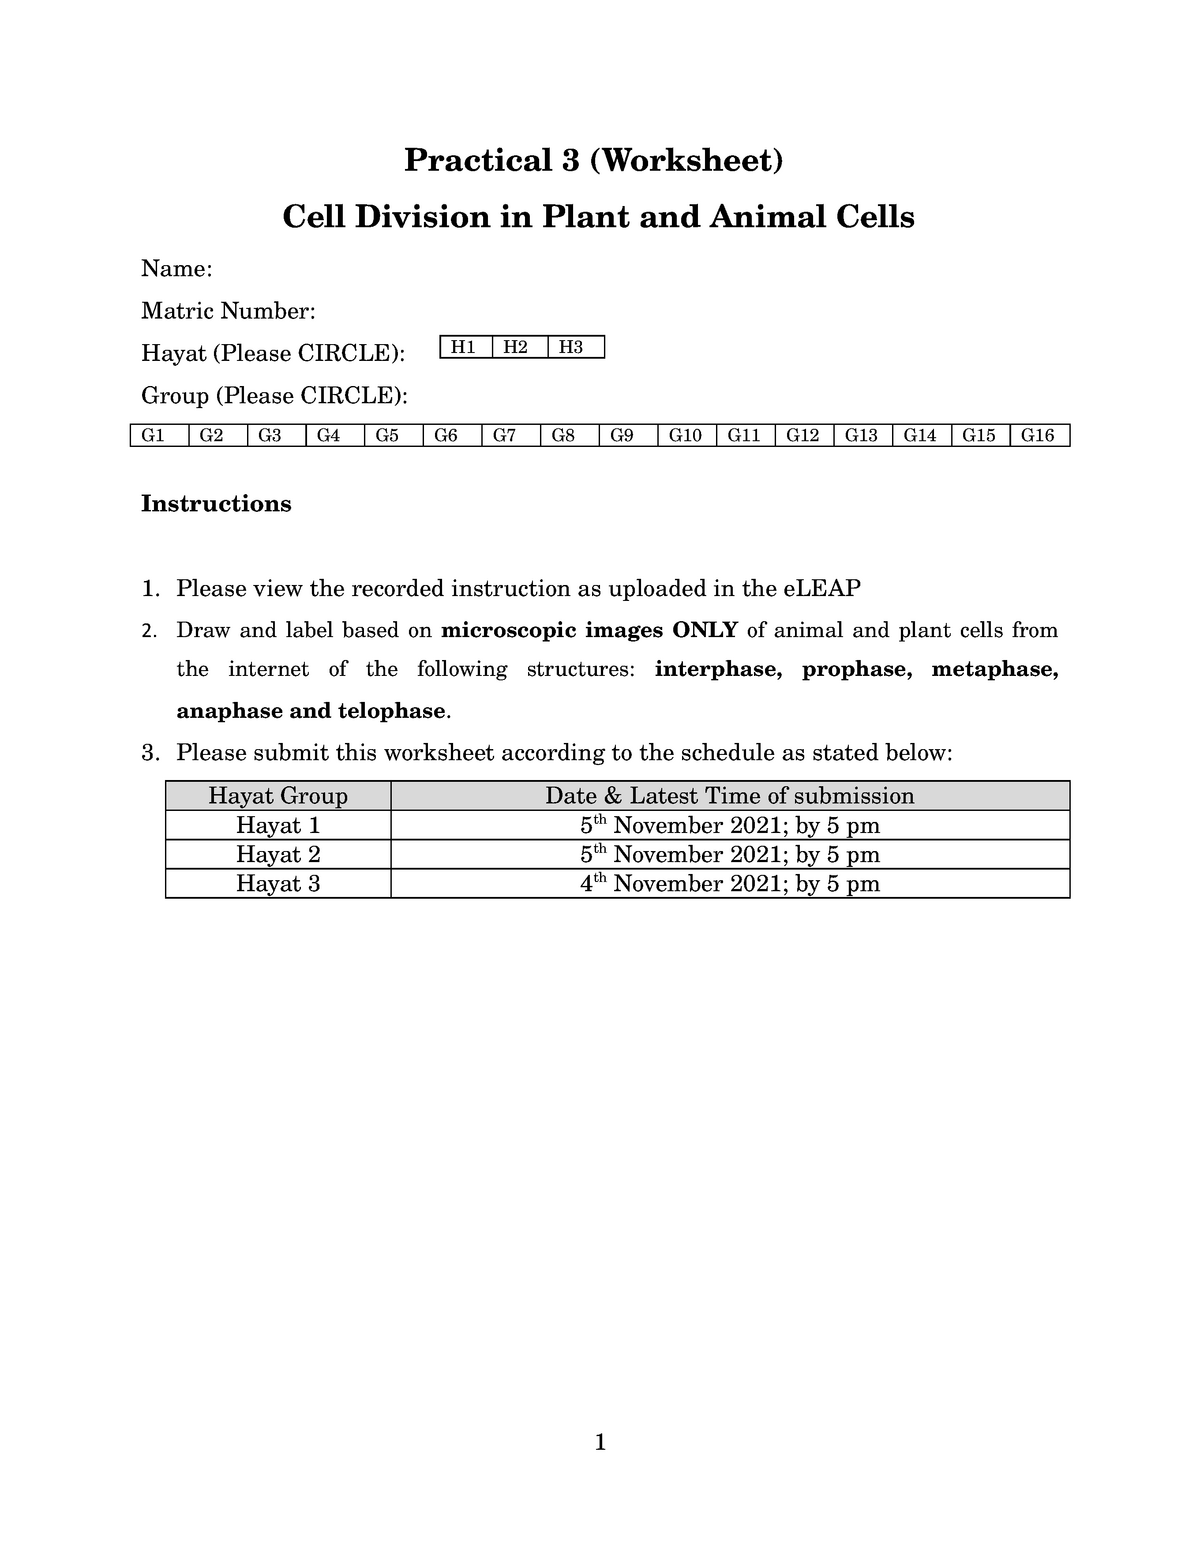 cell-division-in-plant-animal-cells-worksheet-practical-3-worksheet-cell-division-in-plant